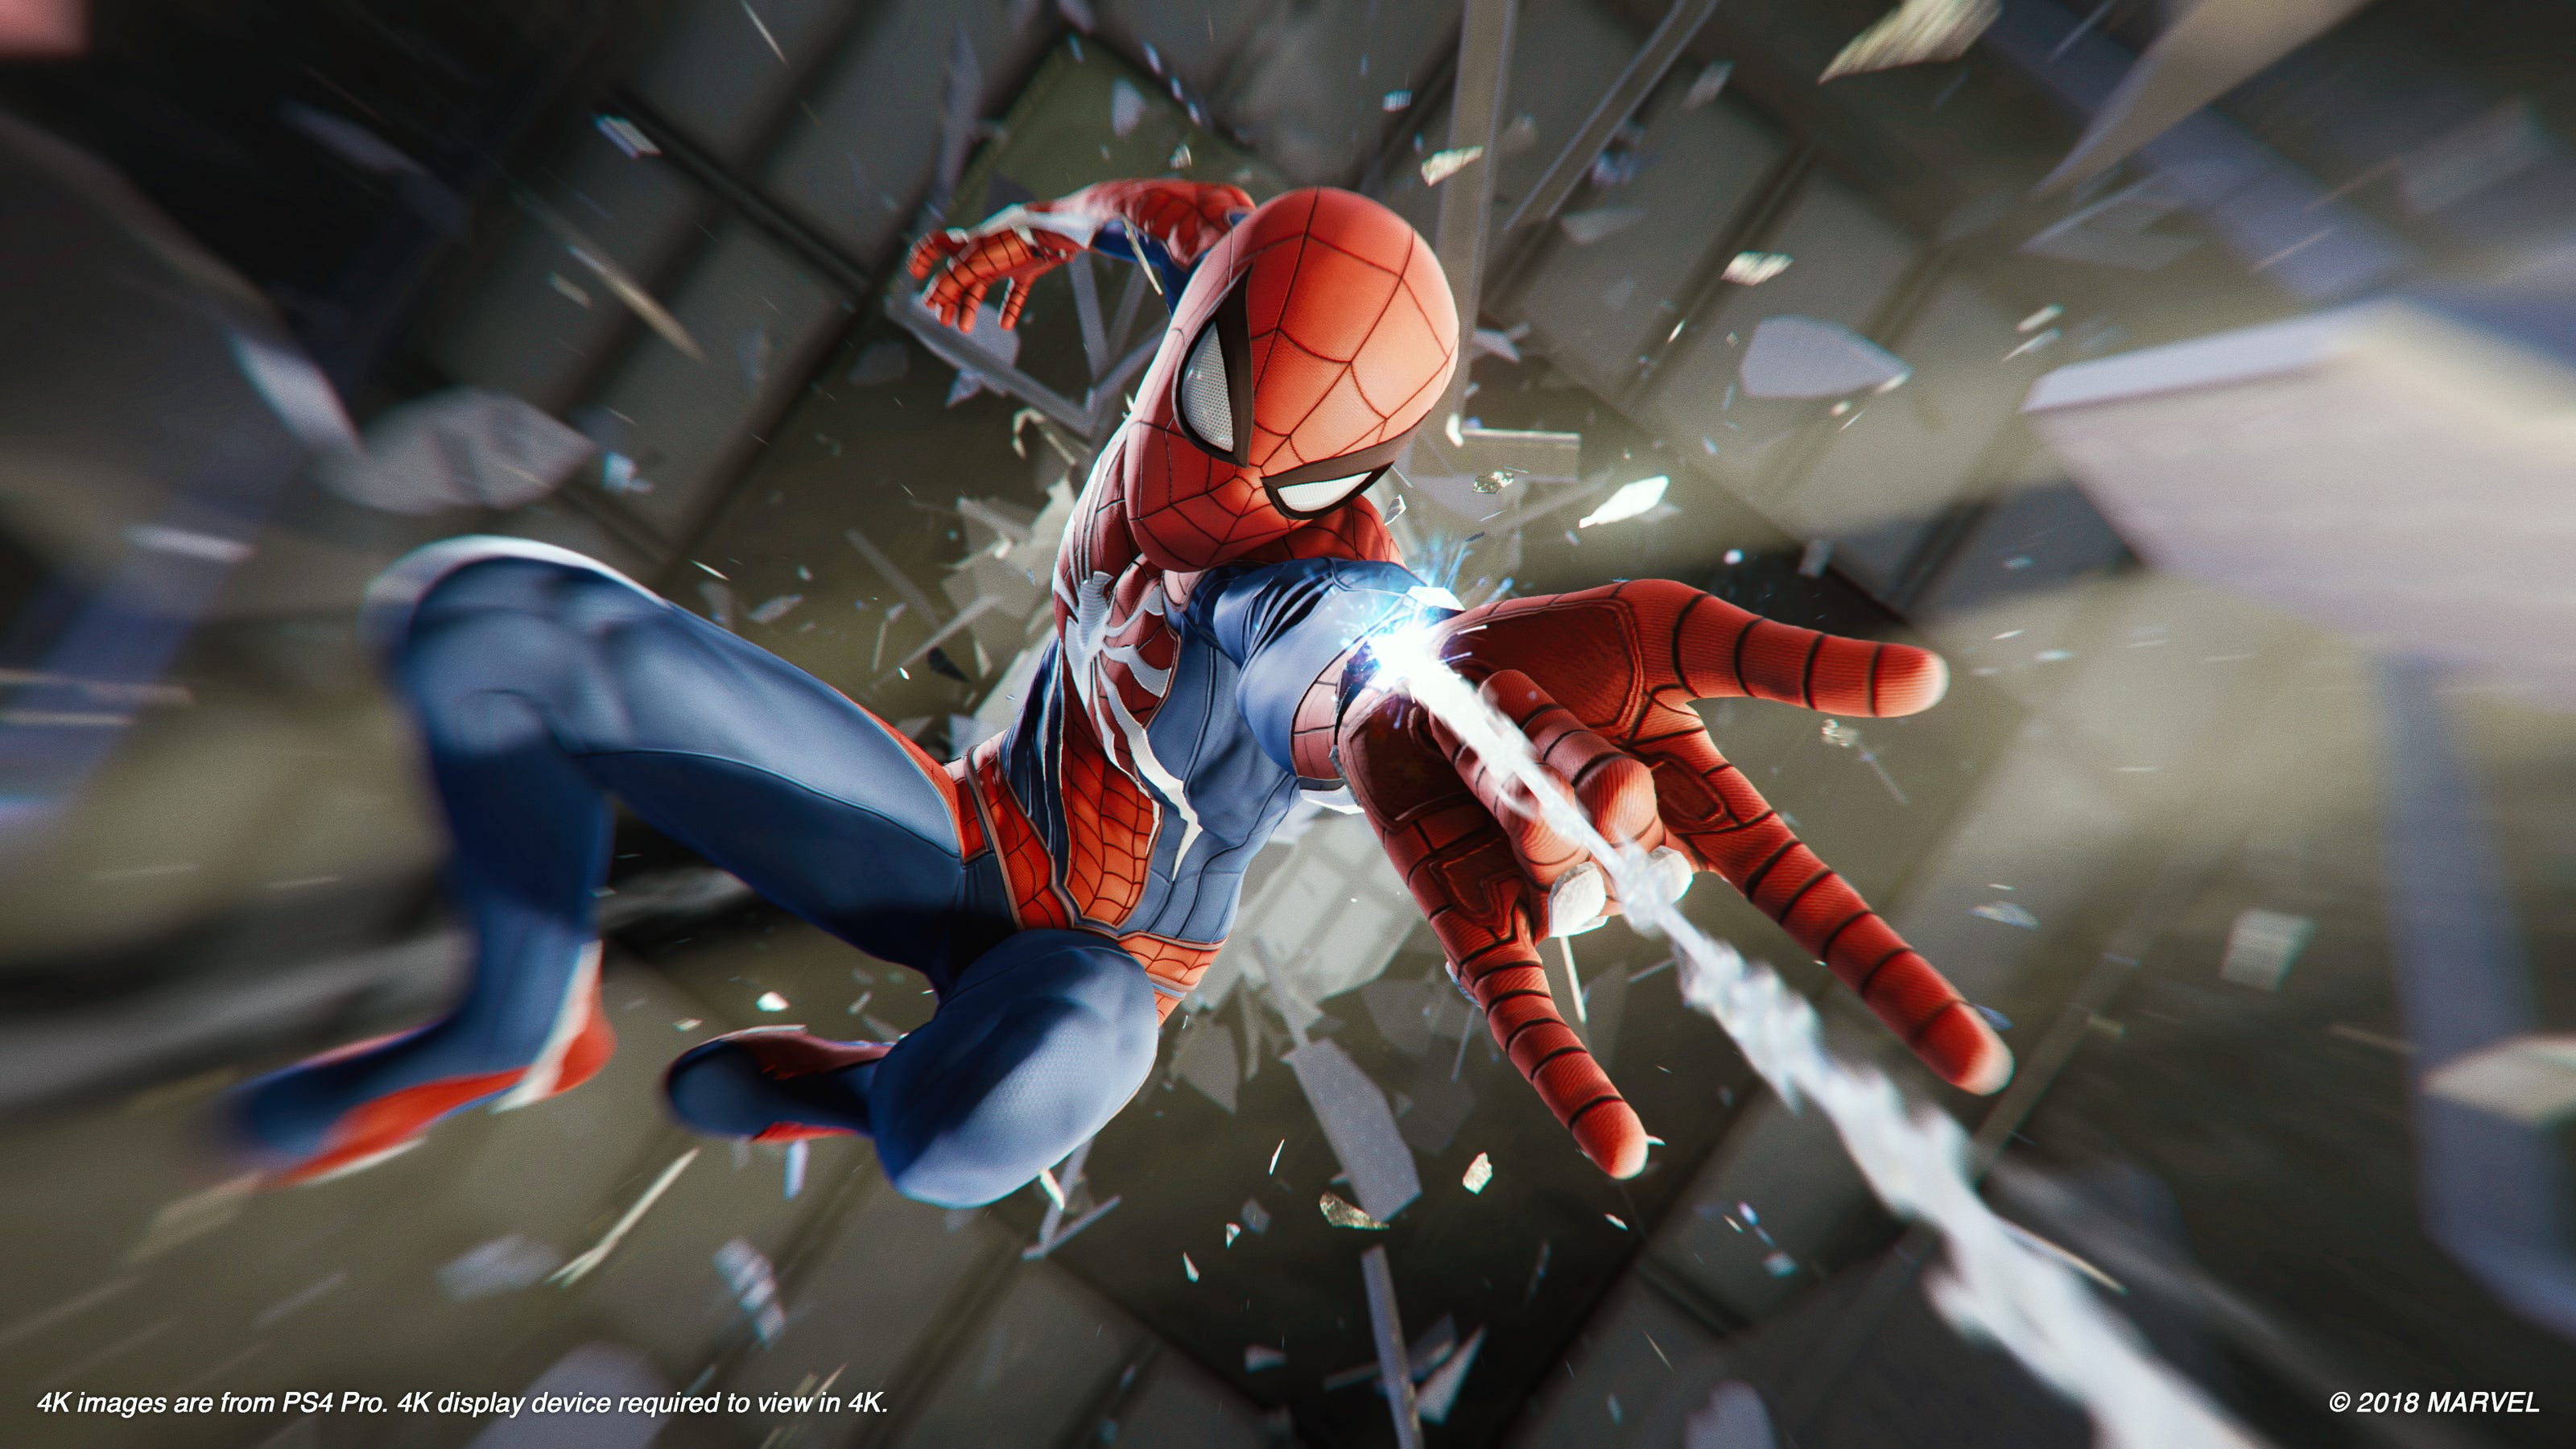 Marvel's PS4 sells record 3.3 million copies in opening